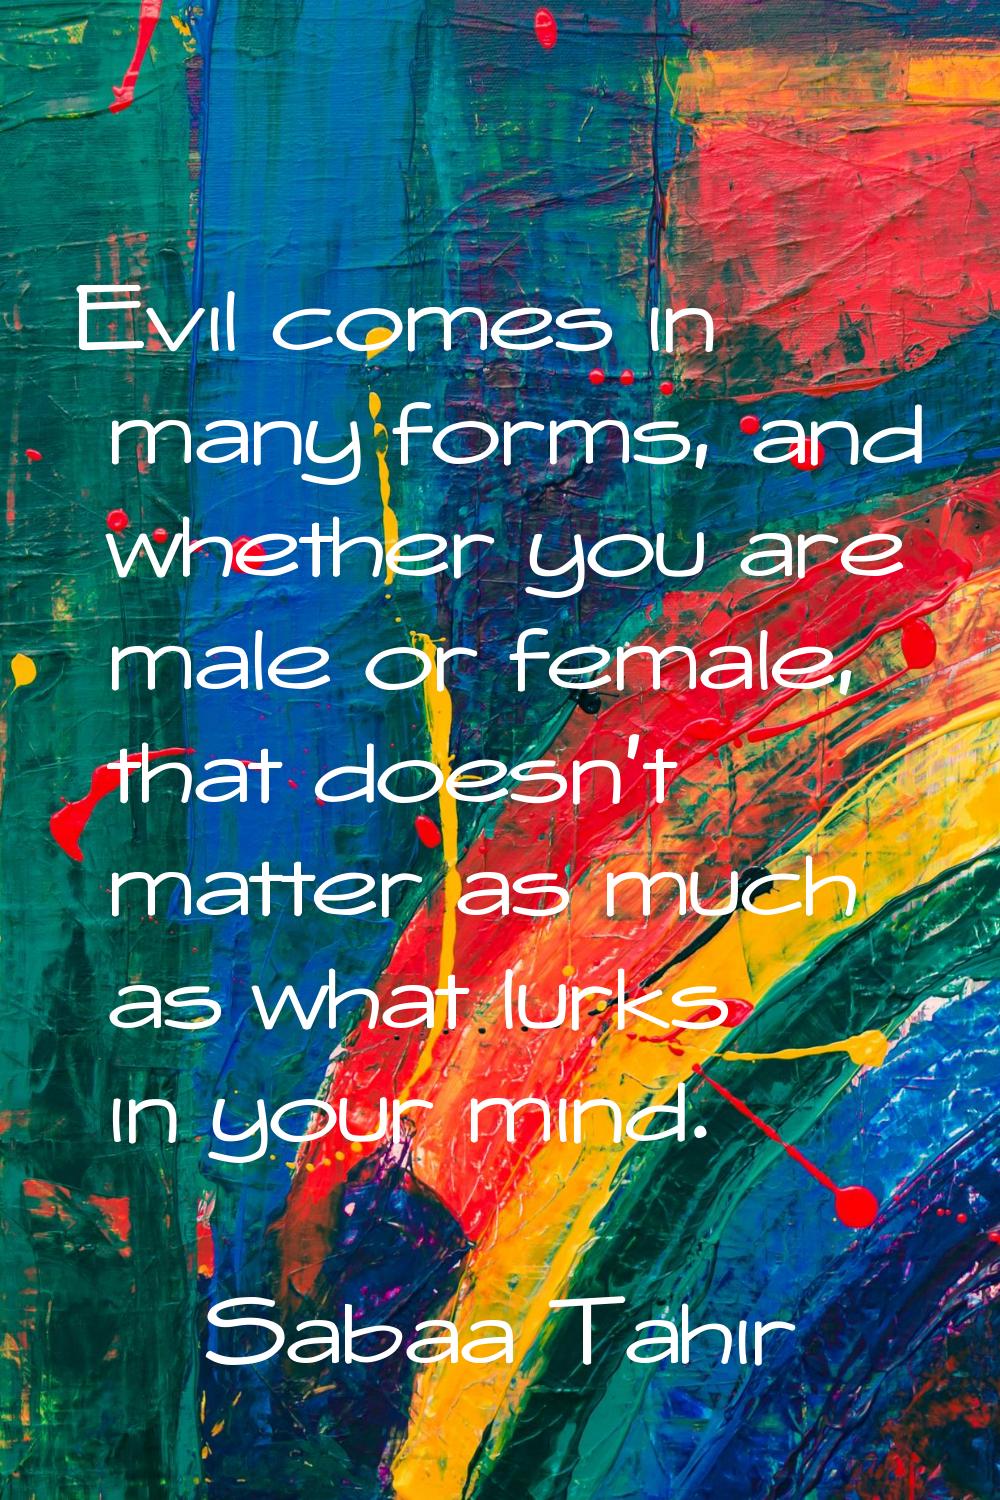 Evil comes in many forms, and whether you are male or female, that doesn't matter as much as what l